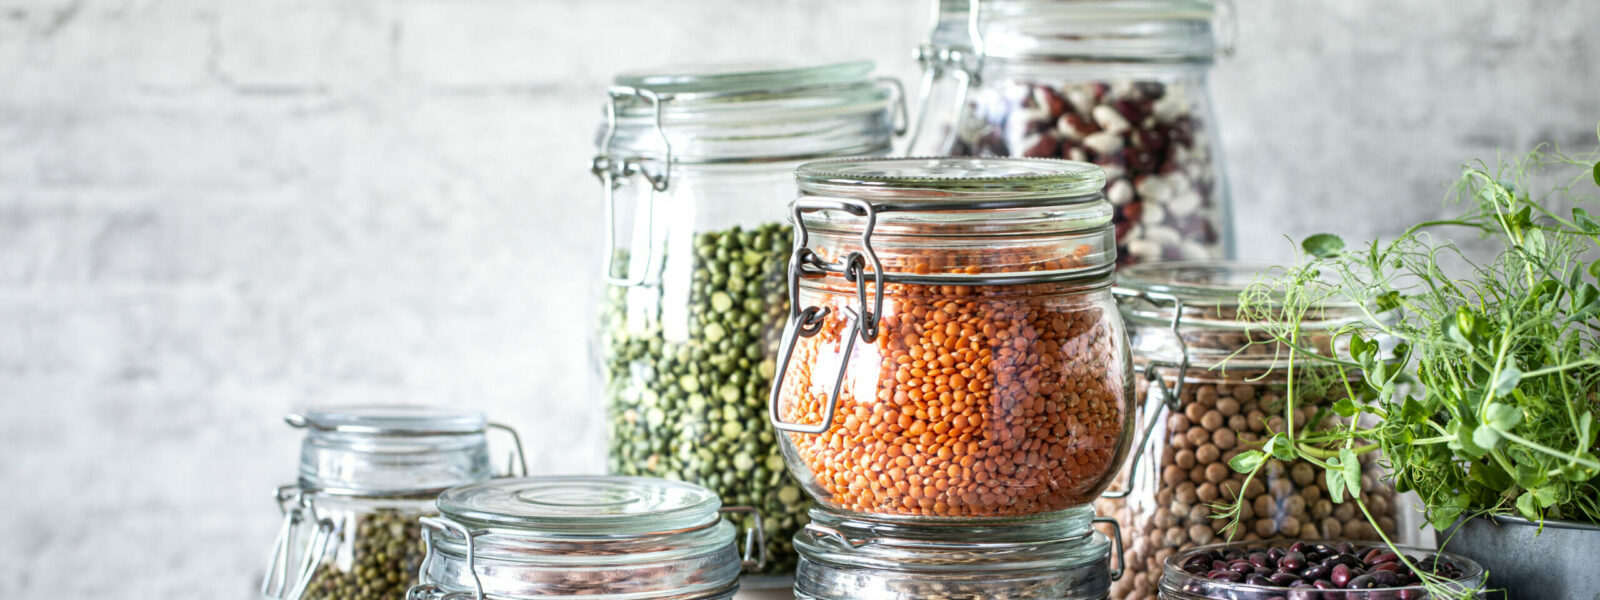 Set of different legumes in glass jars on, concrete white table. A source of protein for vegetarians. The concept of healthy eating and food storage.